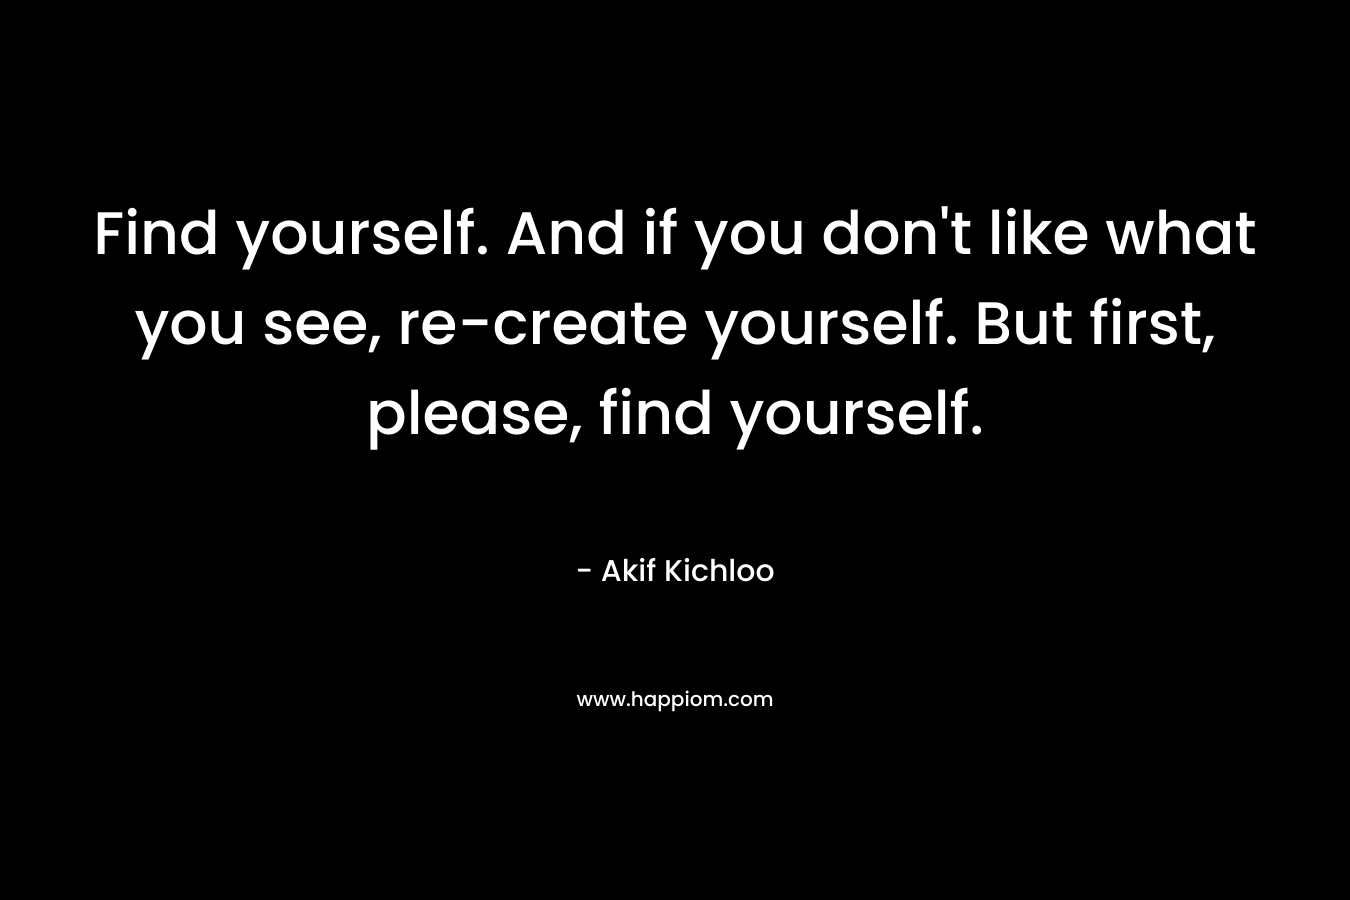 Find yourself. And if you don’t like what you see, re-create yourself. But first, please, find yourself. – Akif Kichloo